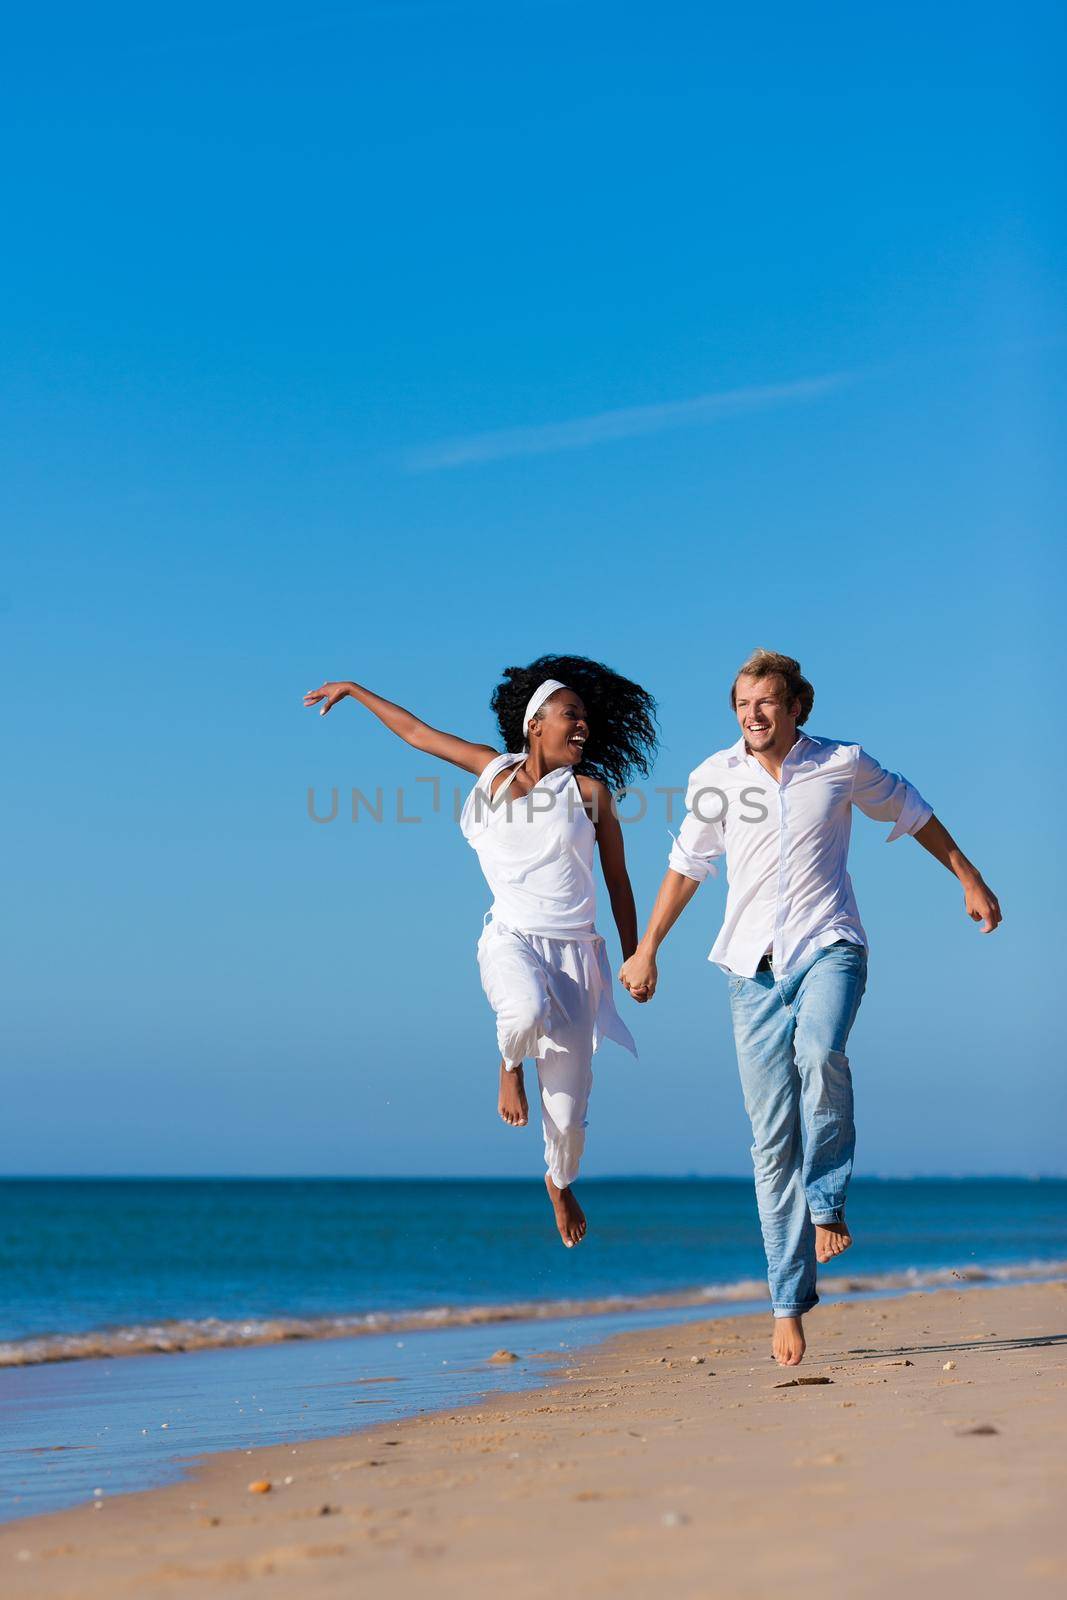 Couple - black woman and Caucasian man - walking and running down a beach in their vacation